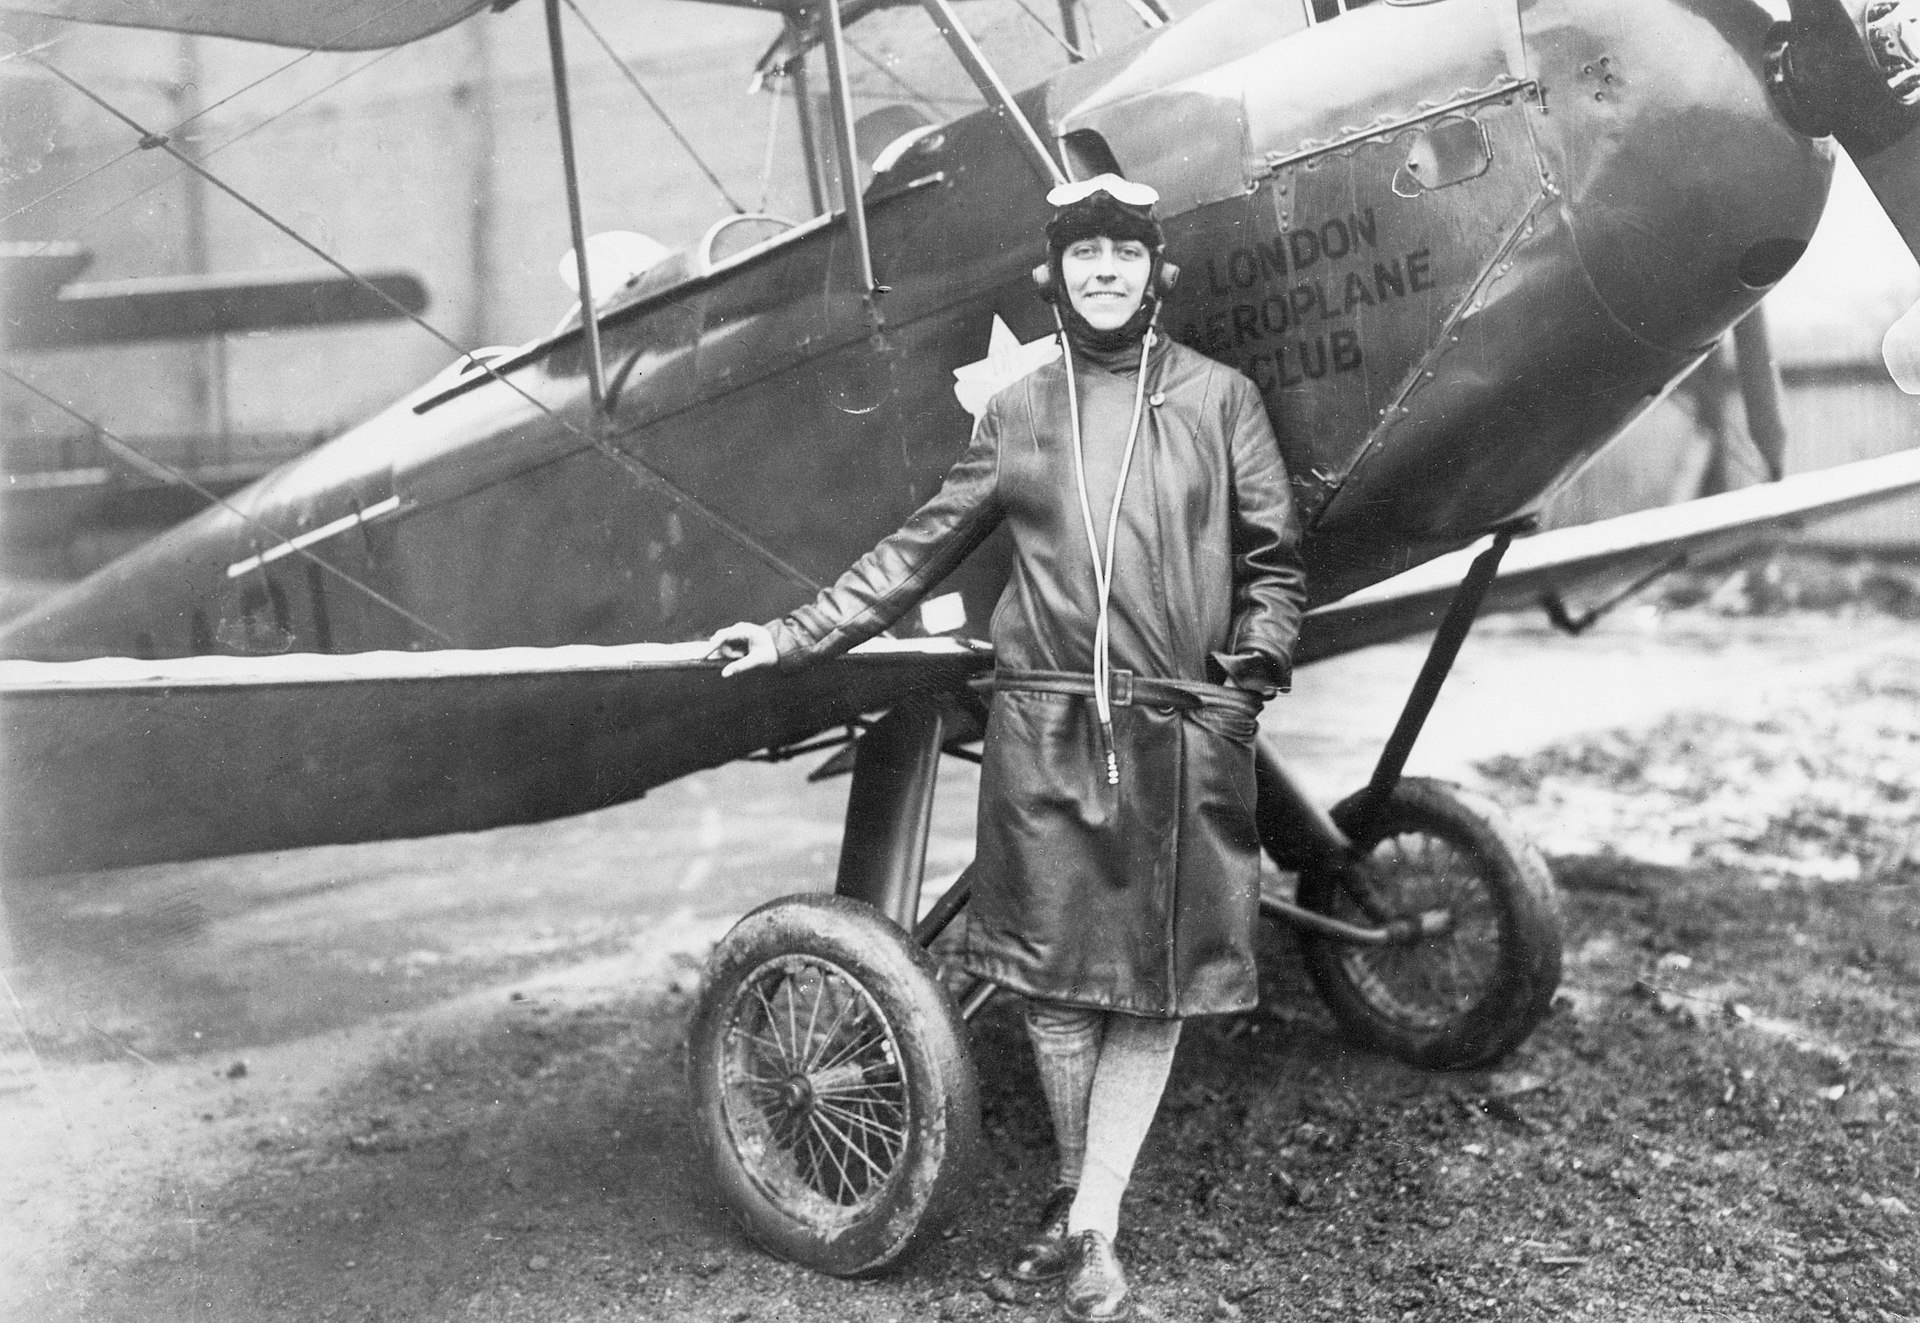 Black-and-white image of a woman wearing a three-quarter length coat with flight goggles on her head standing near a biplane